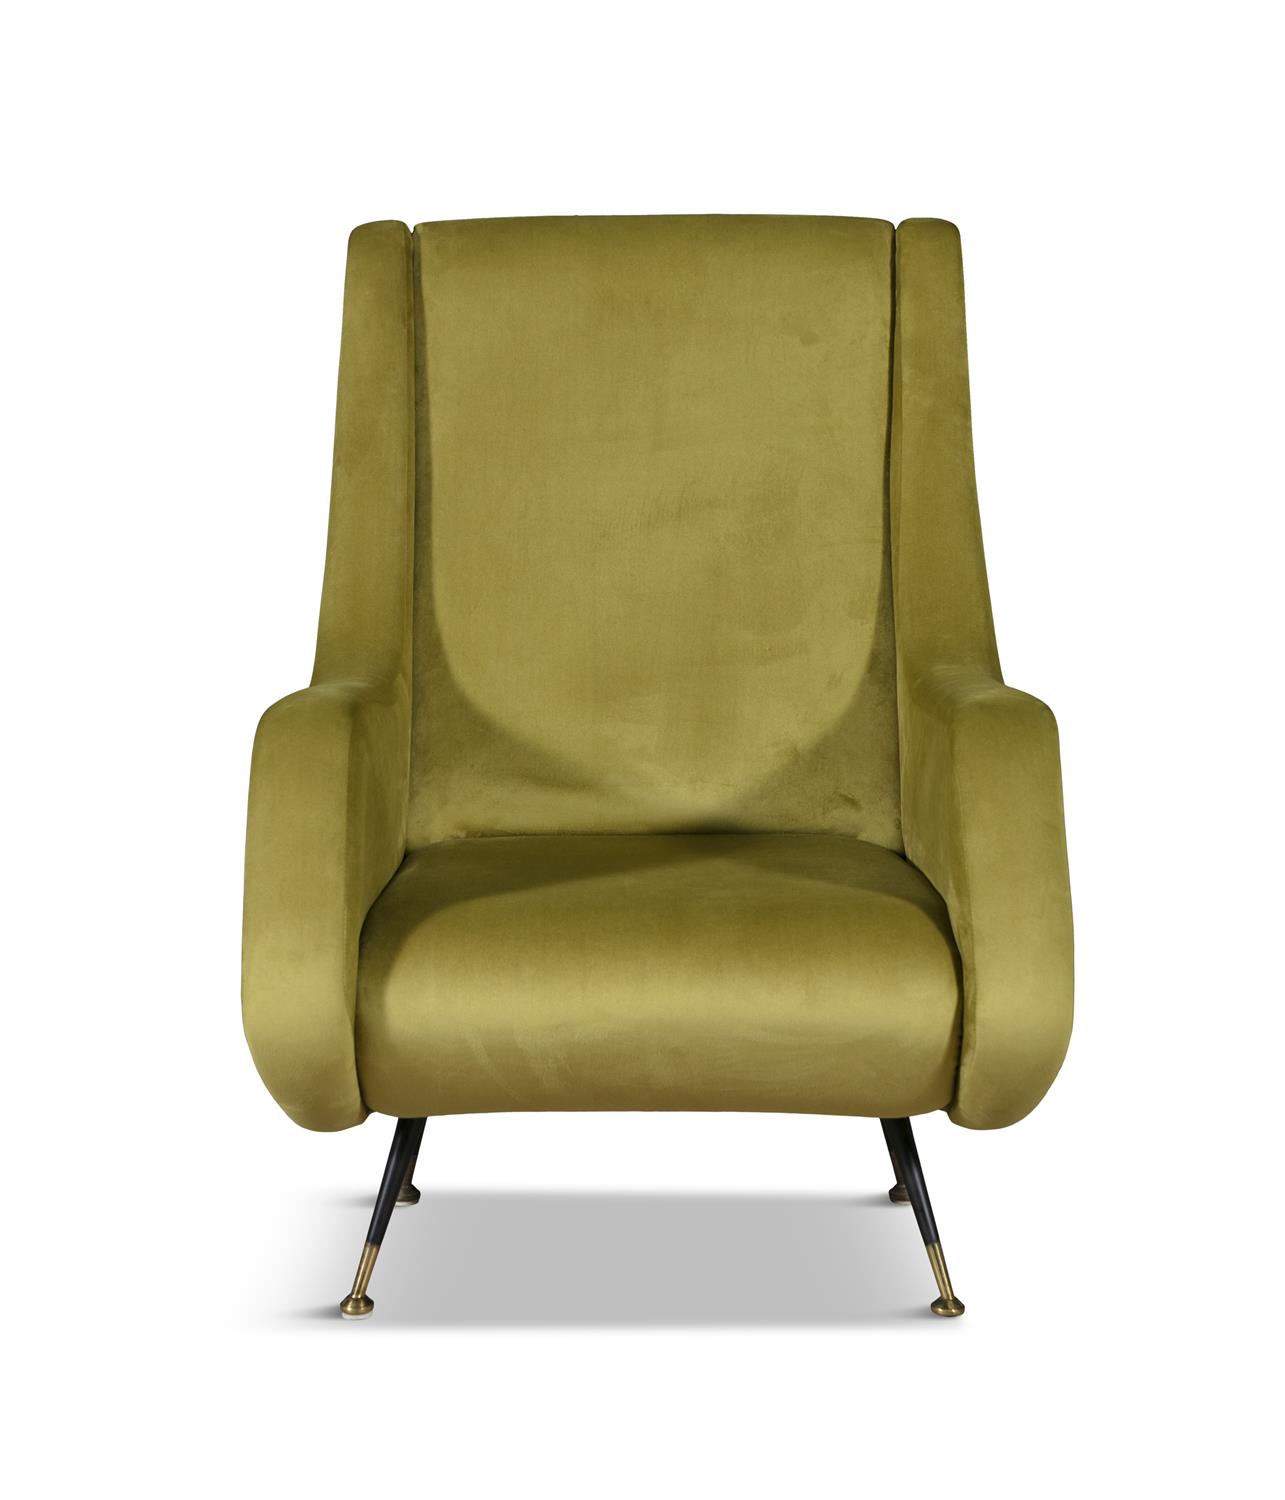 ARMCHAIRS A pair olive upholstered Italian armchairs. 67 x 90 x 97cm(h); seat 40cm(h) - Image 4 of 5